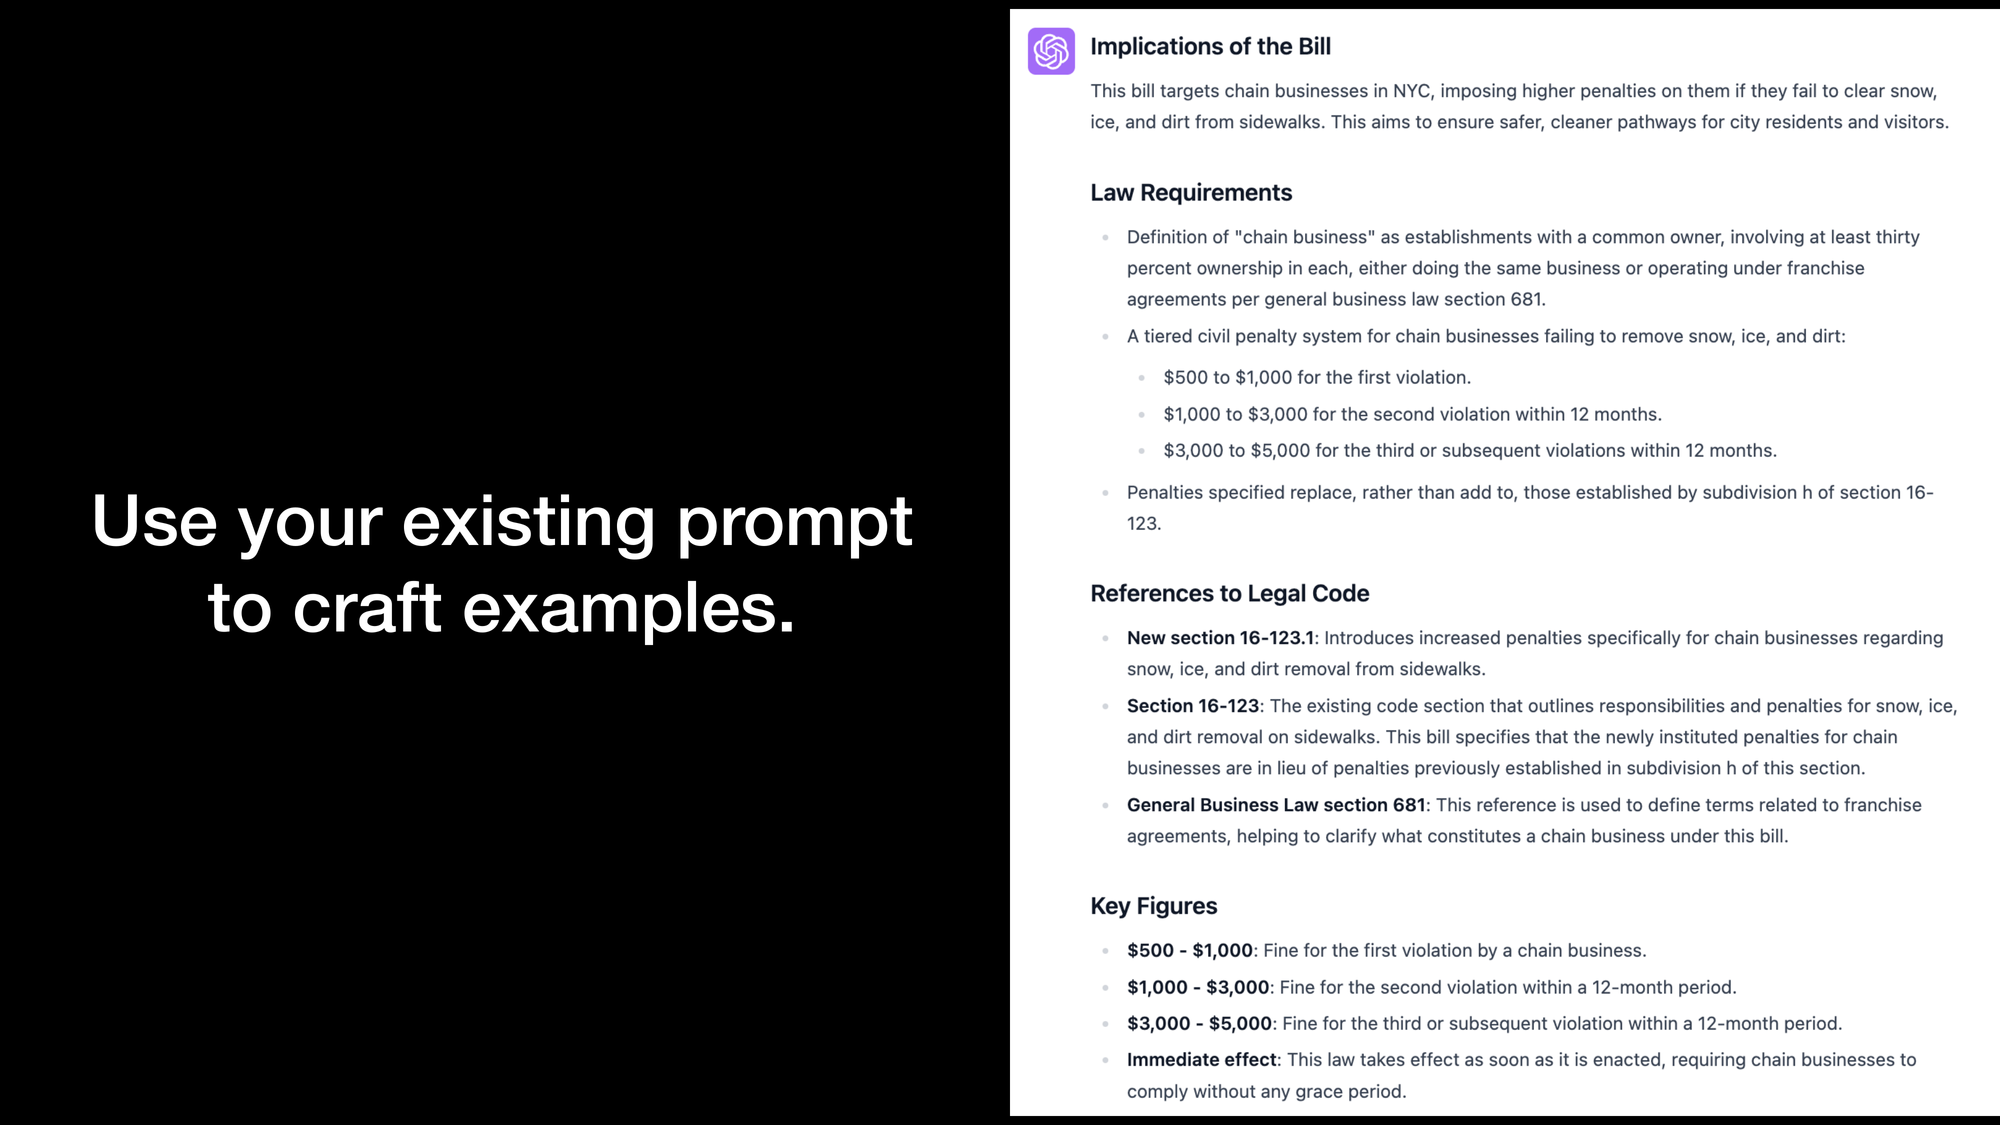 Use your existing prompt to craft examples. On the right is output of a summary for a NYC bill.